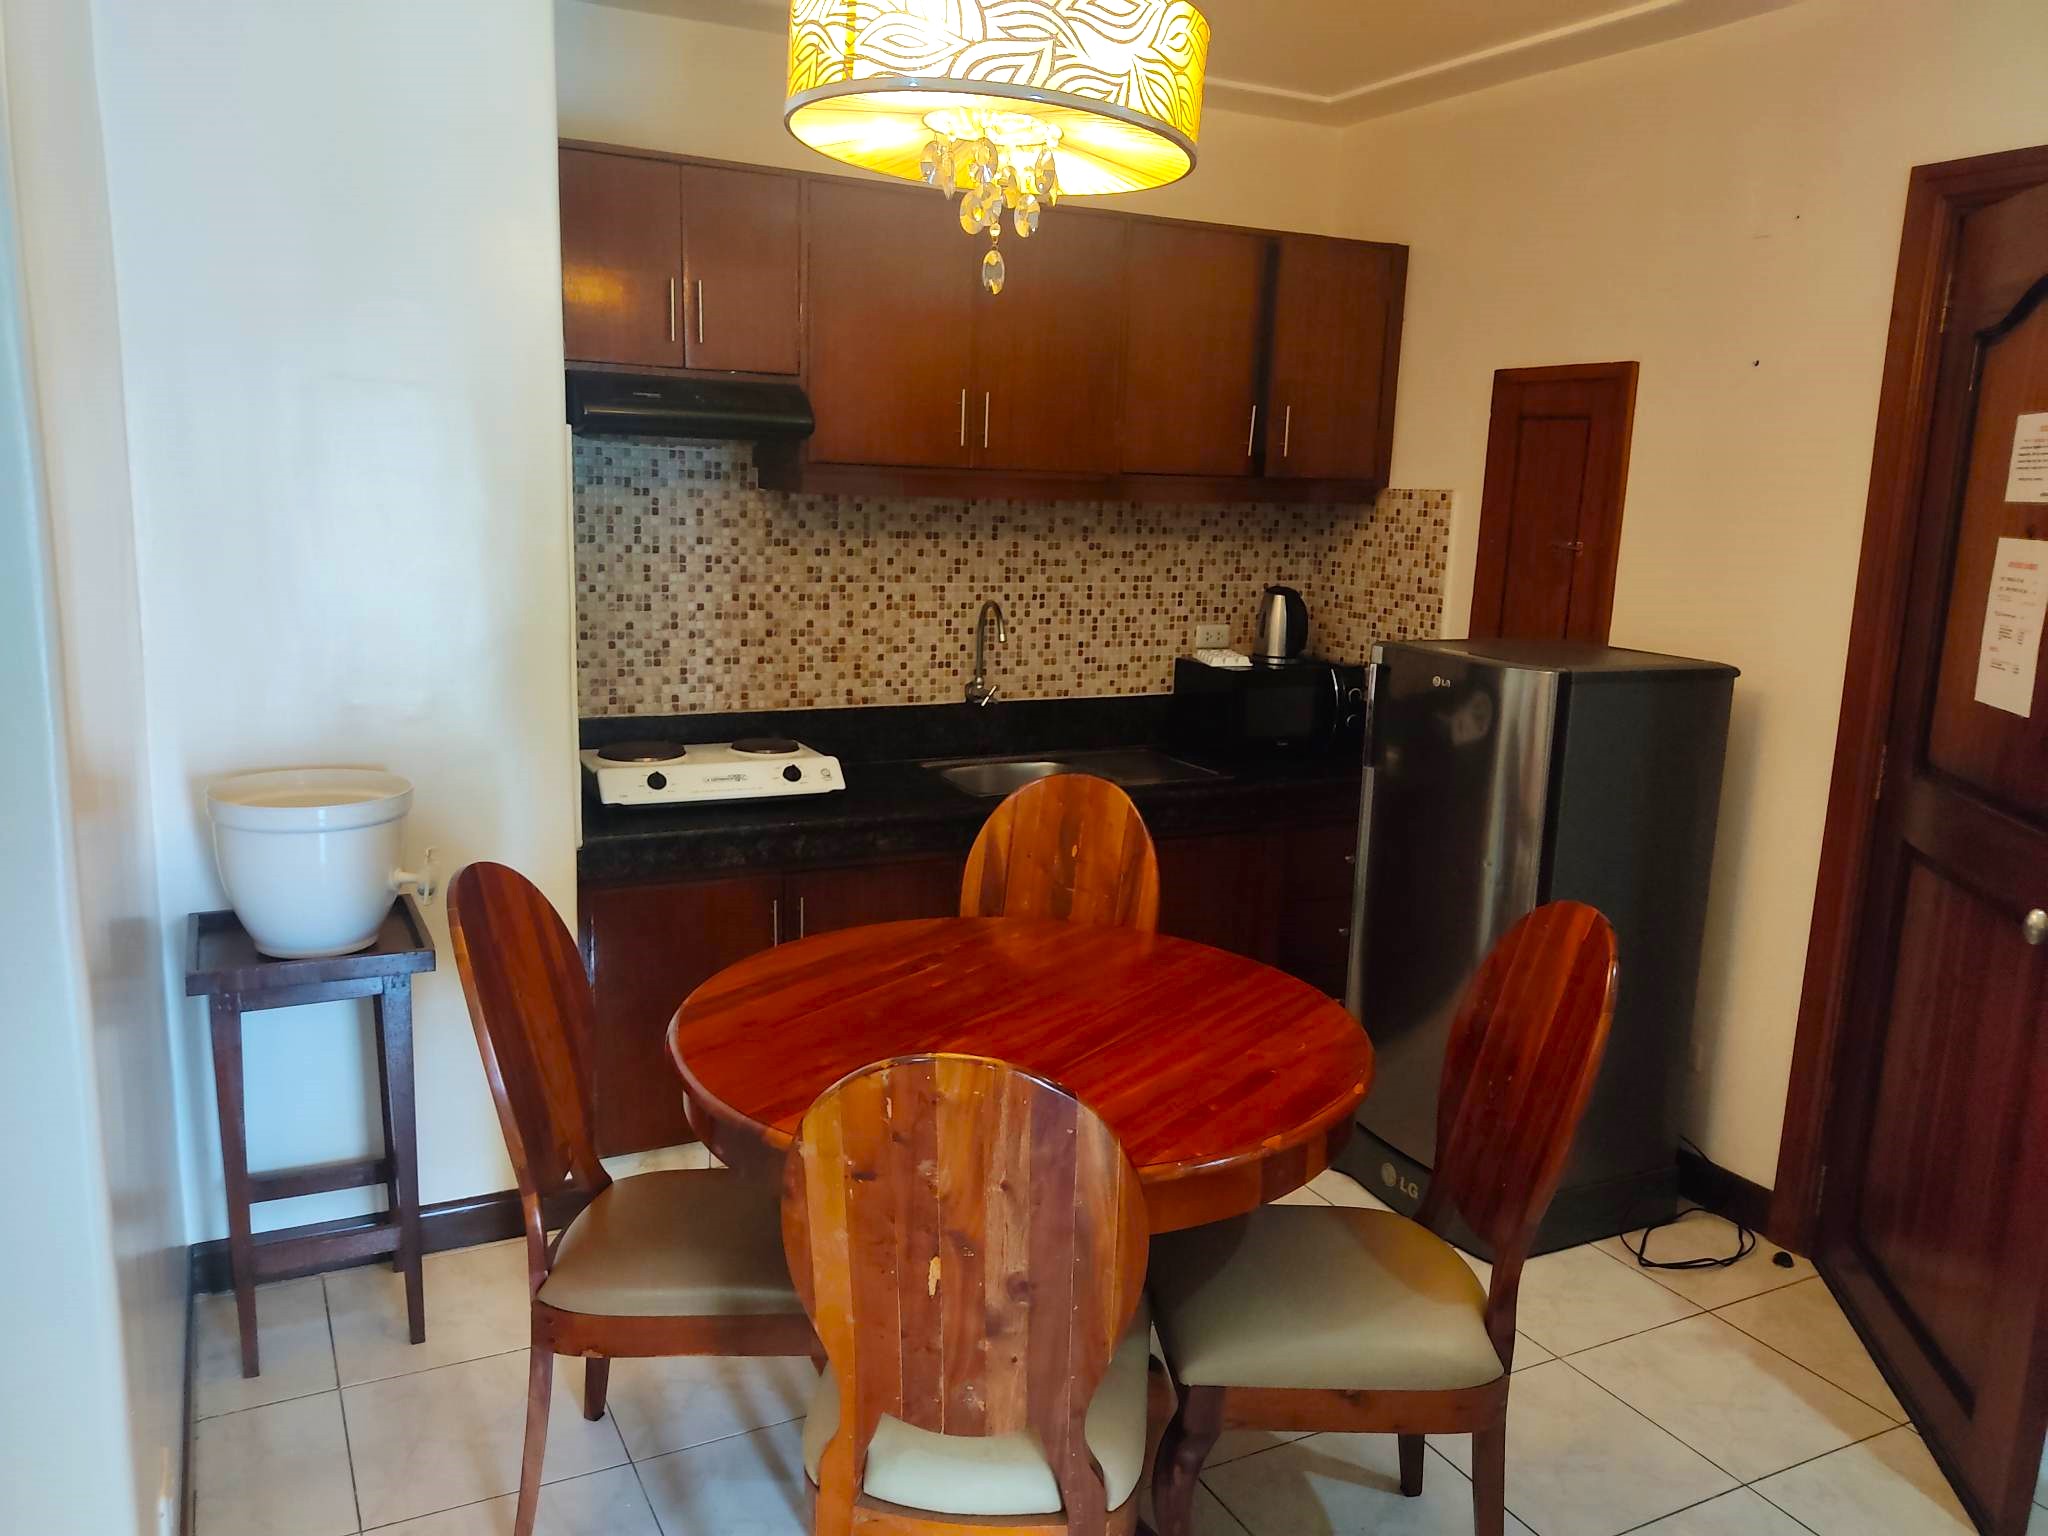 2-bedroom-fully-furnished-apartment-with-wifi-located-near-ayala-cebu-city